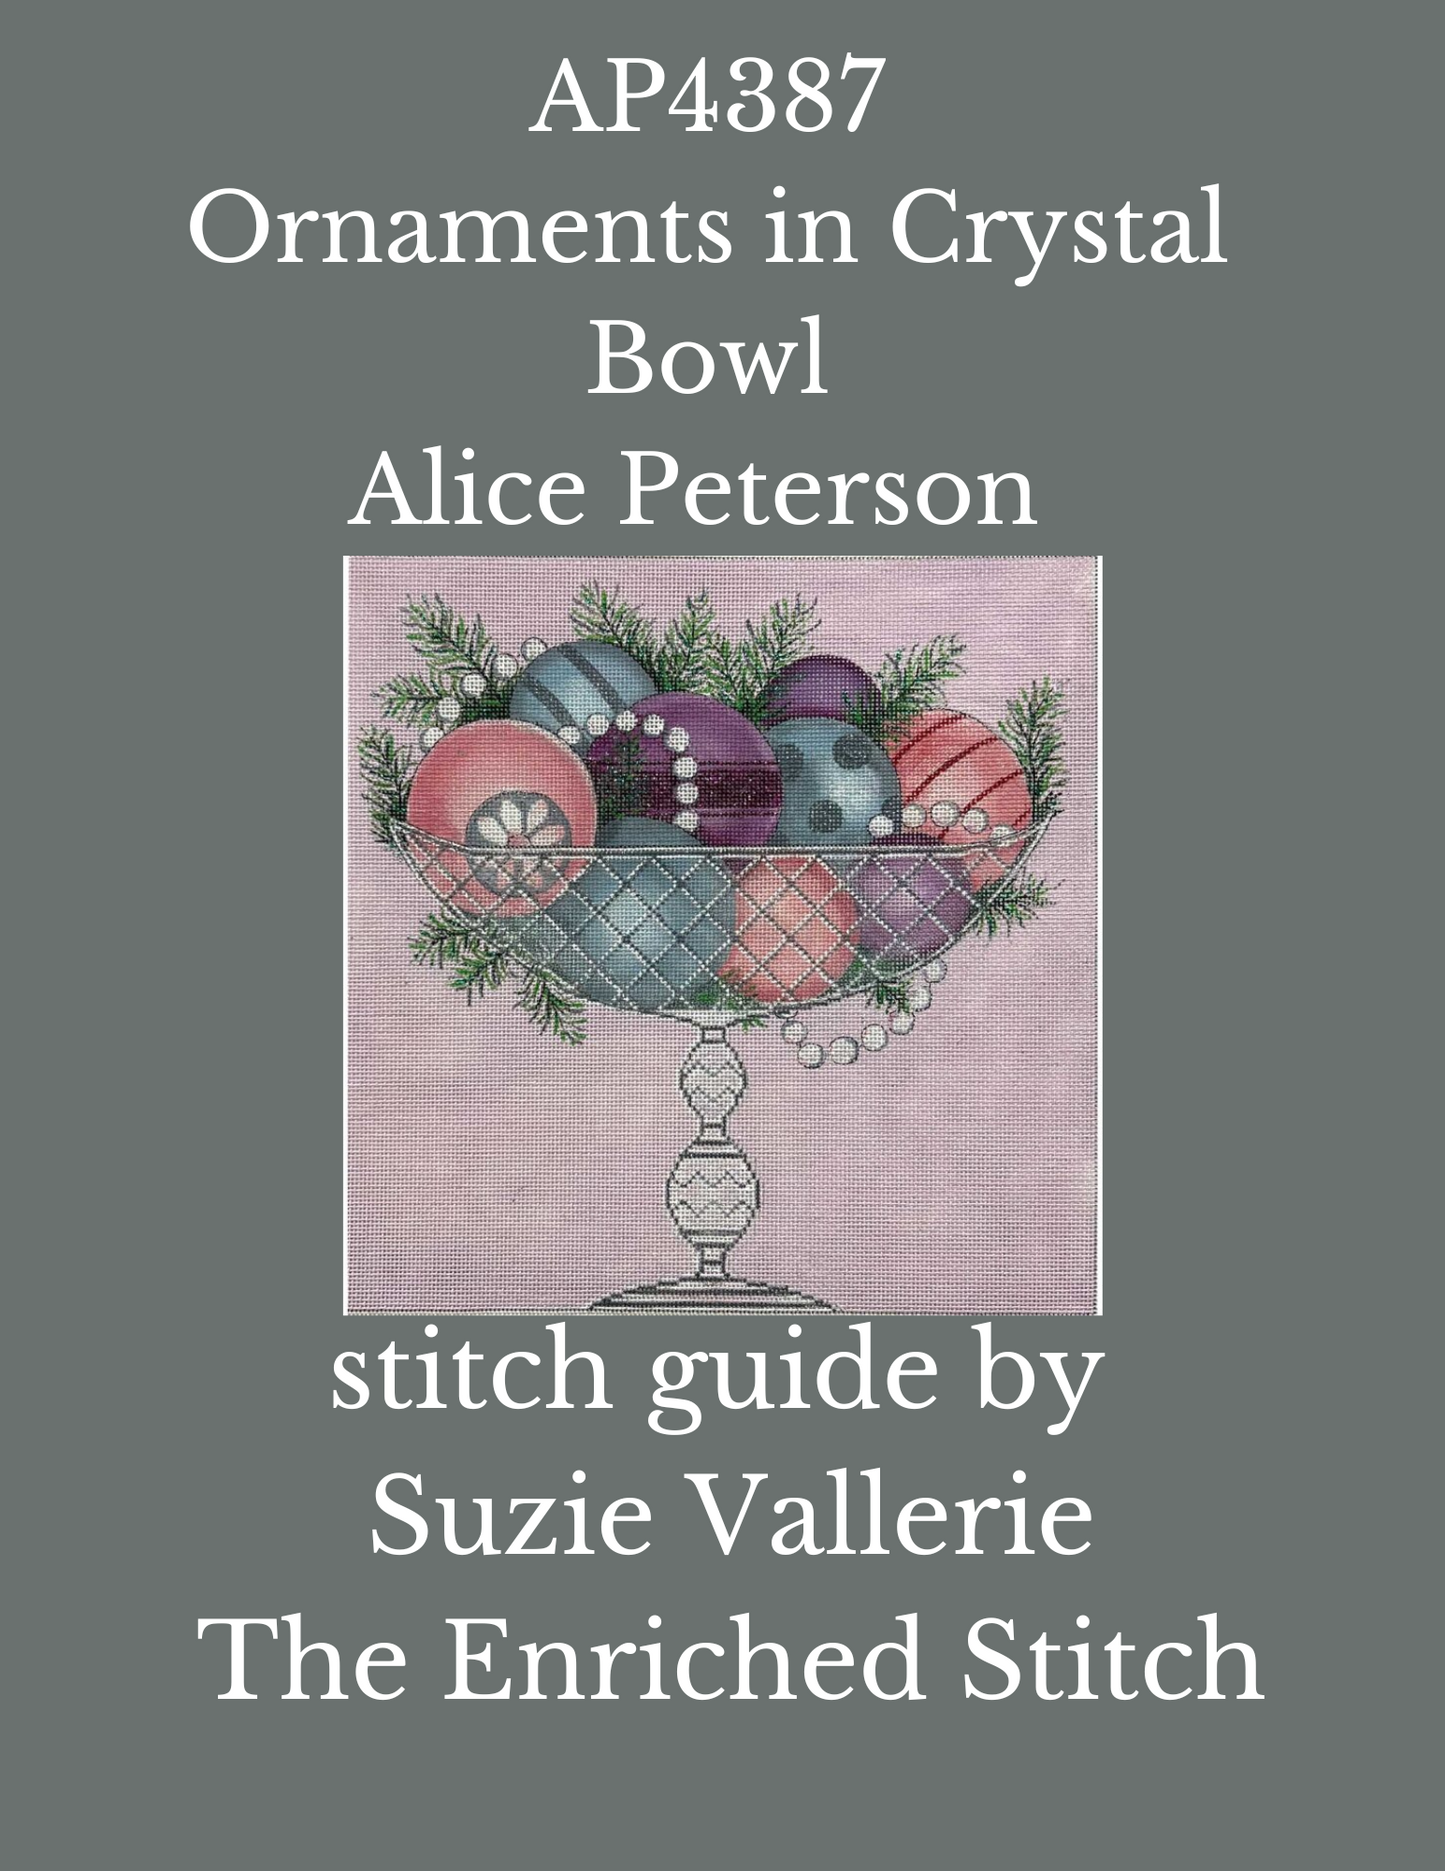 AP4387 Ornaments in Crystal Bowl Stitch Guide